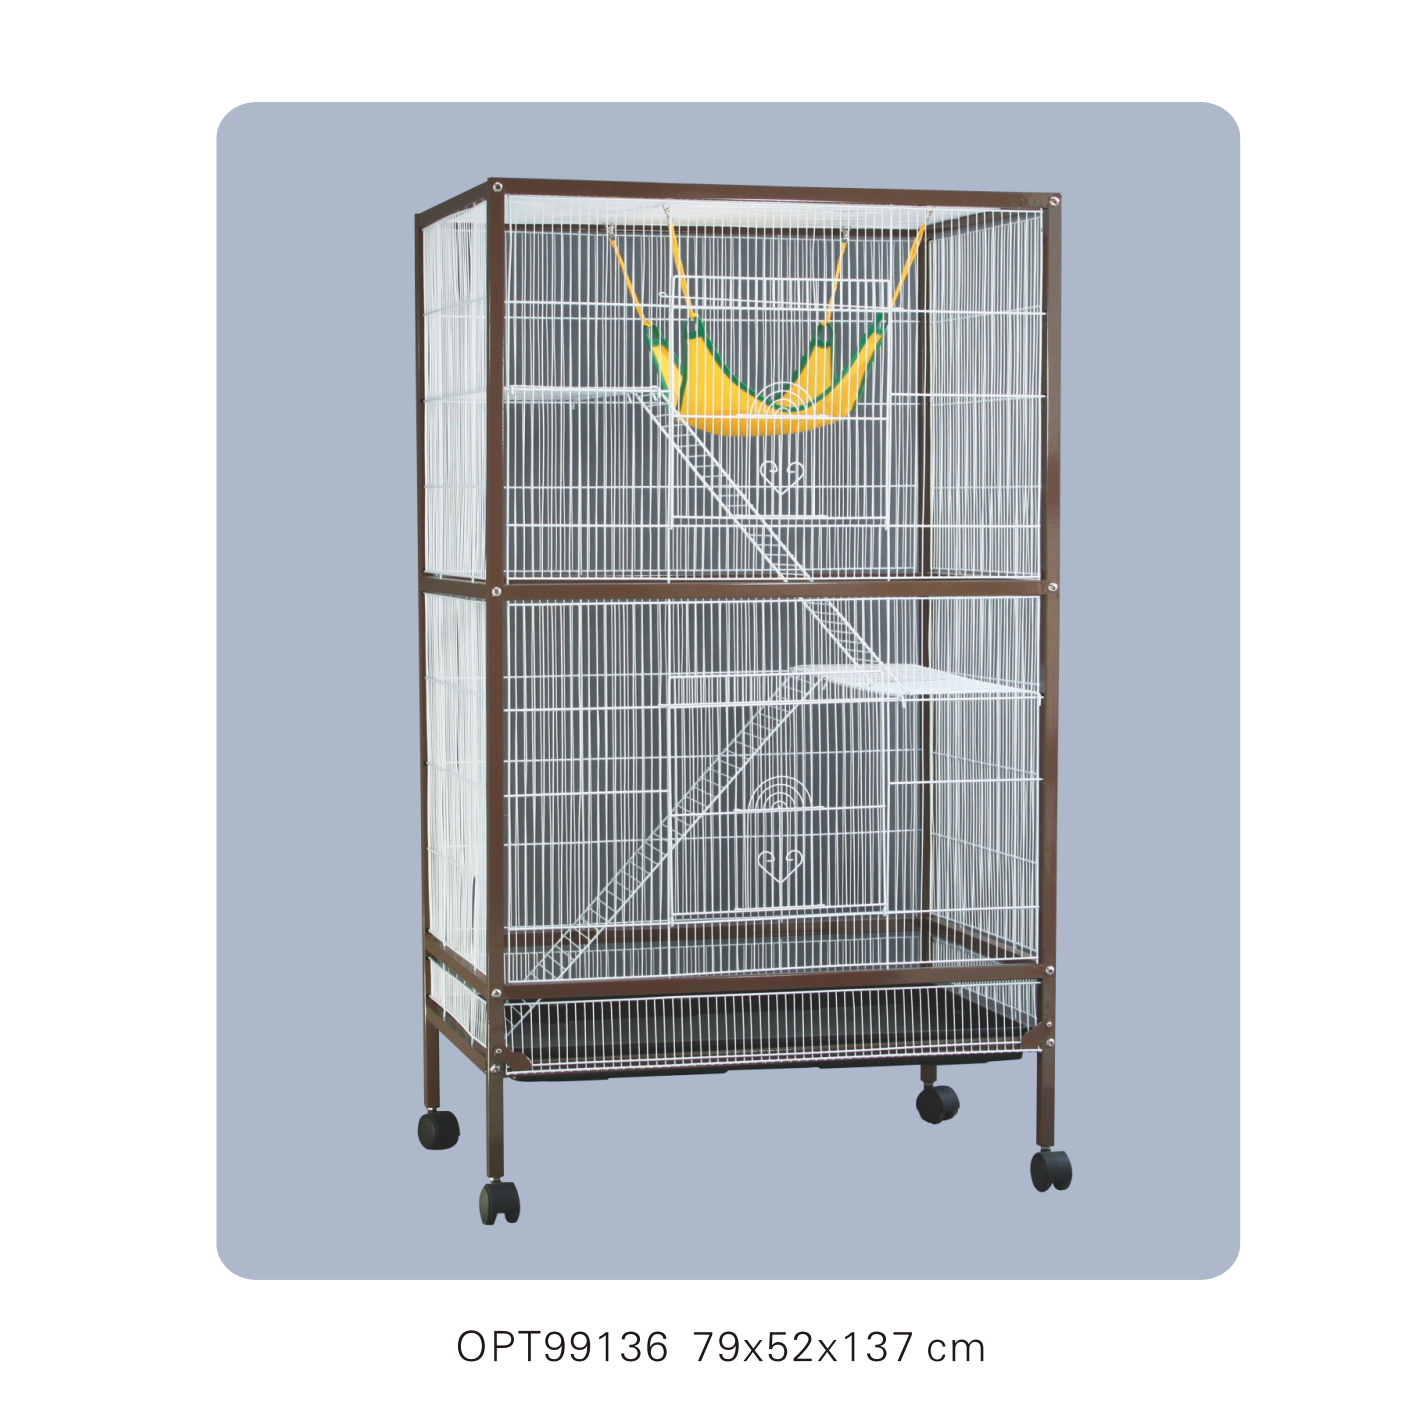 OPT99136 79x52x137cm small animal cages